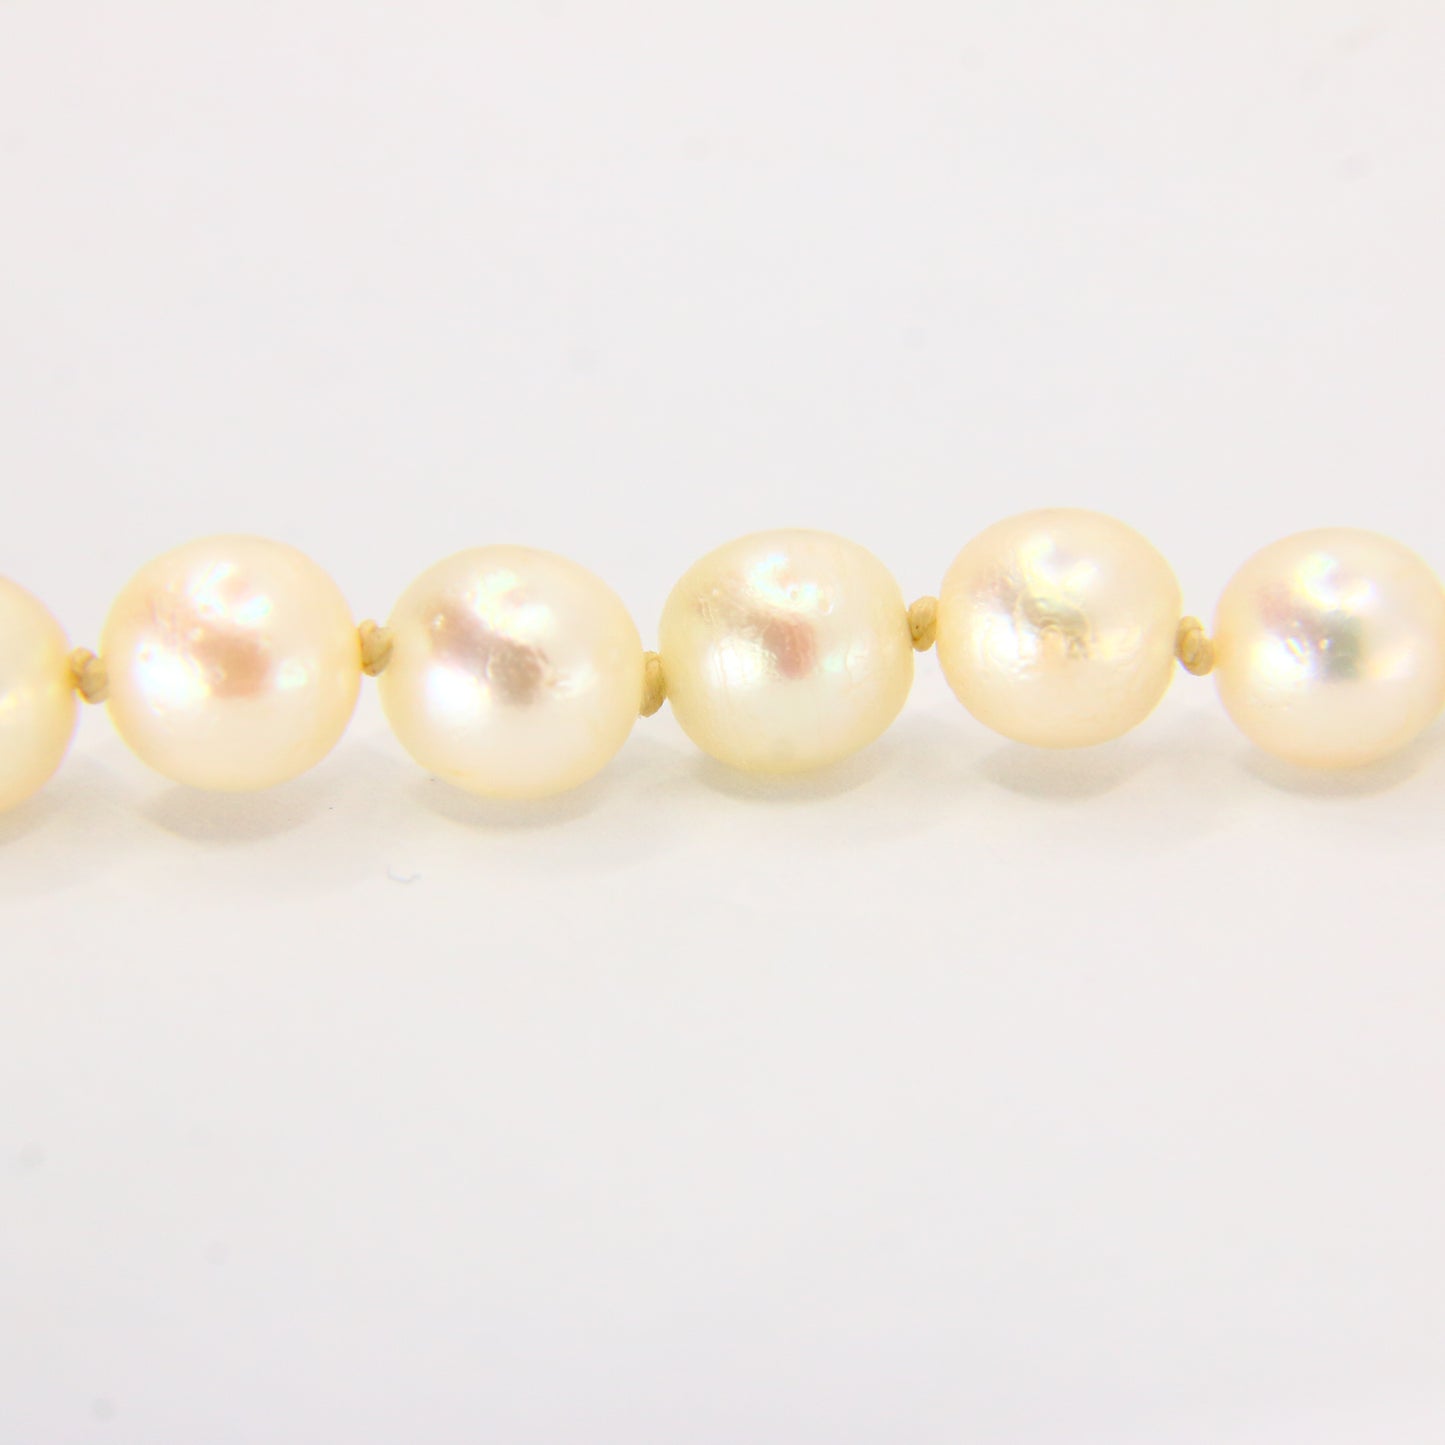 Vintage Pearl Necklace 25 inch Silver Clasp Graduated Beads Boxed